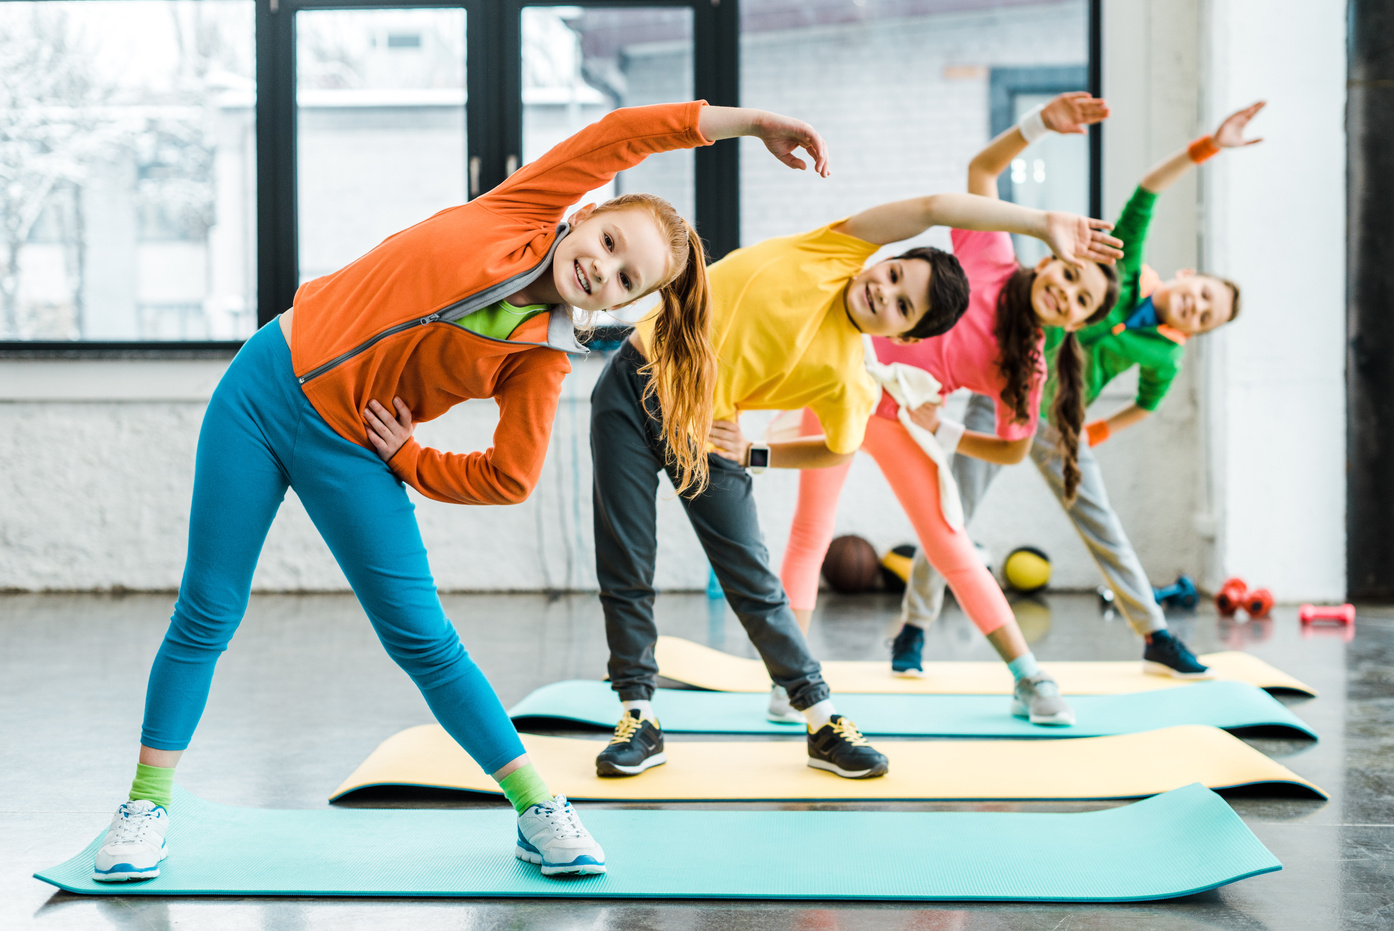 Smiling preteen kids doing sport exercise together